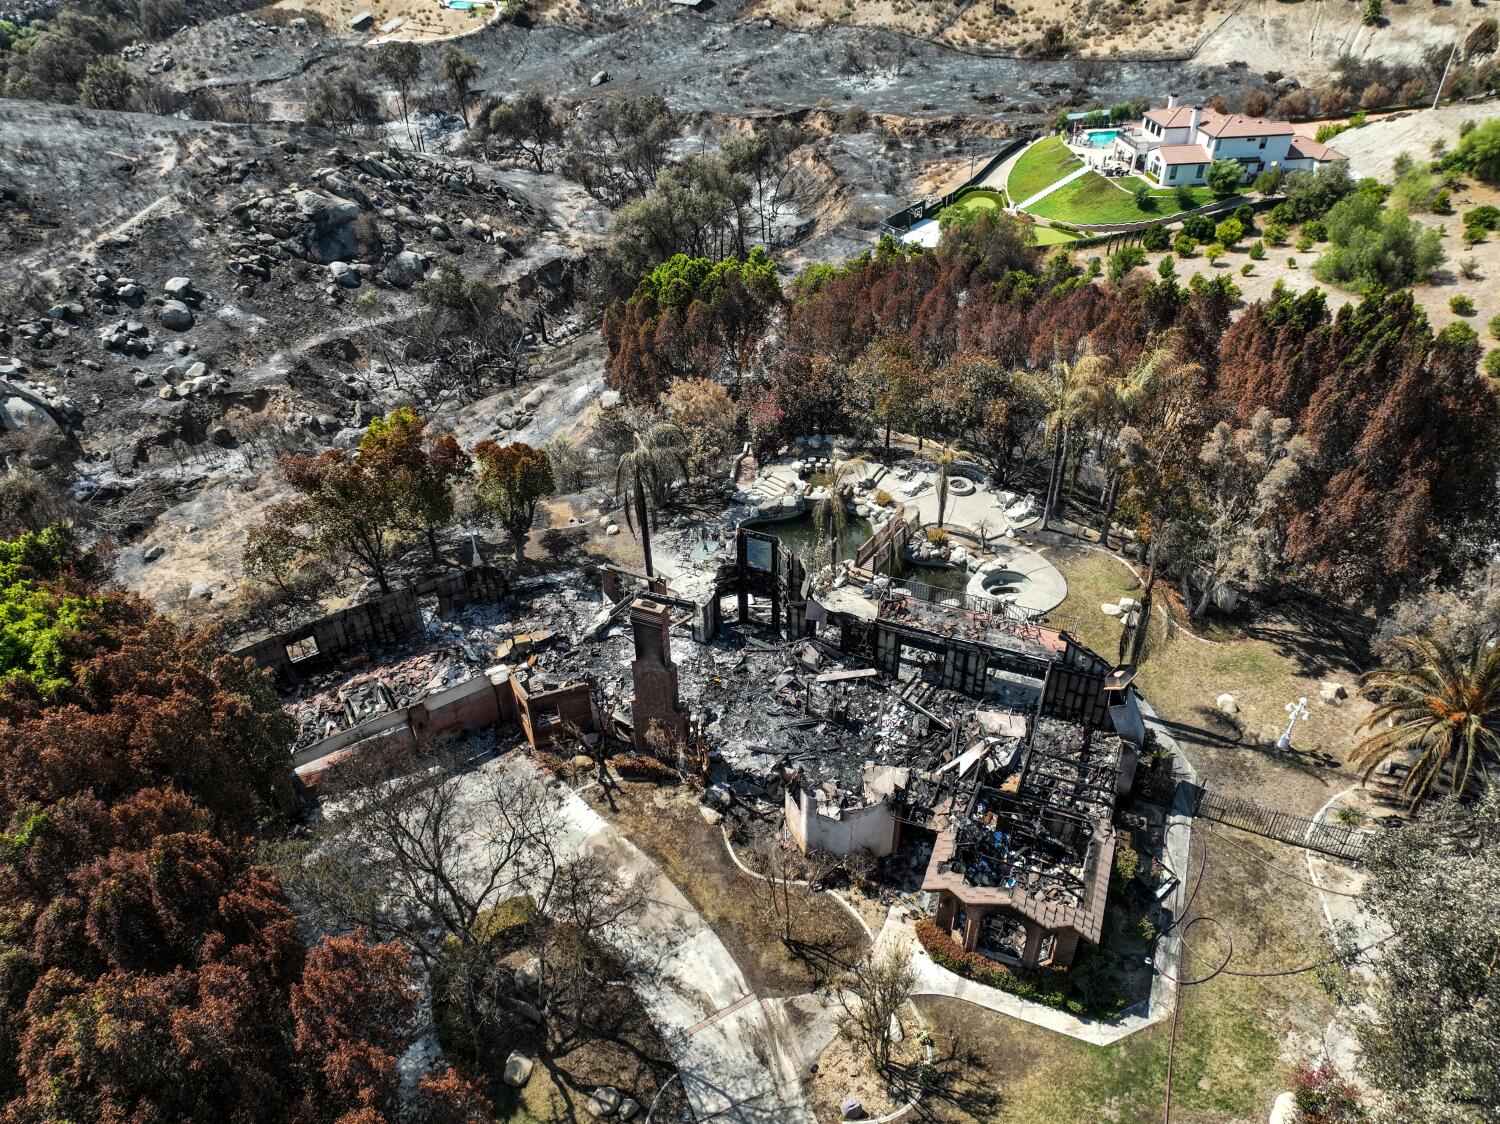 Image for display with article titled Is This the Solution to California's Soaring Insurance Price Due to Wildfire Risk?